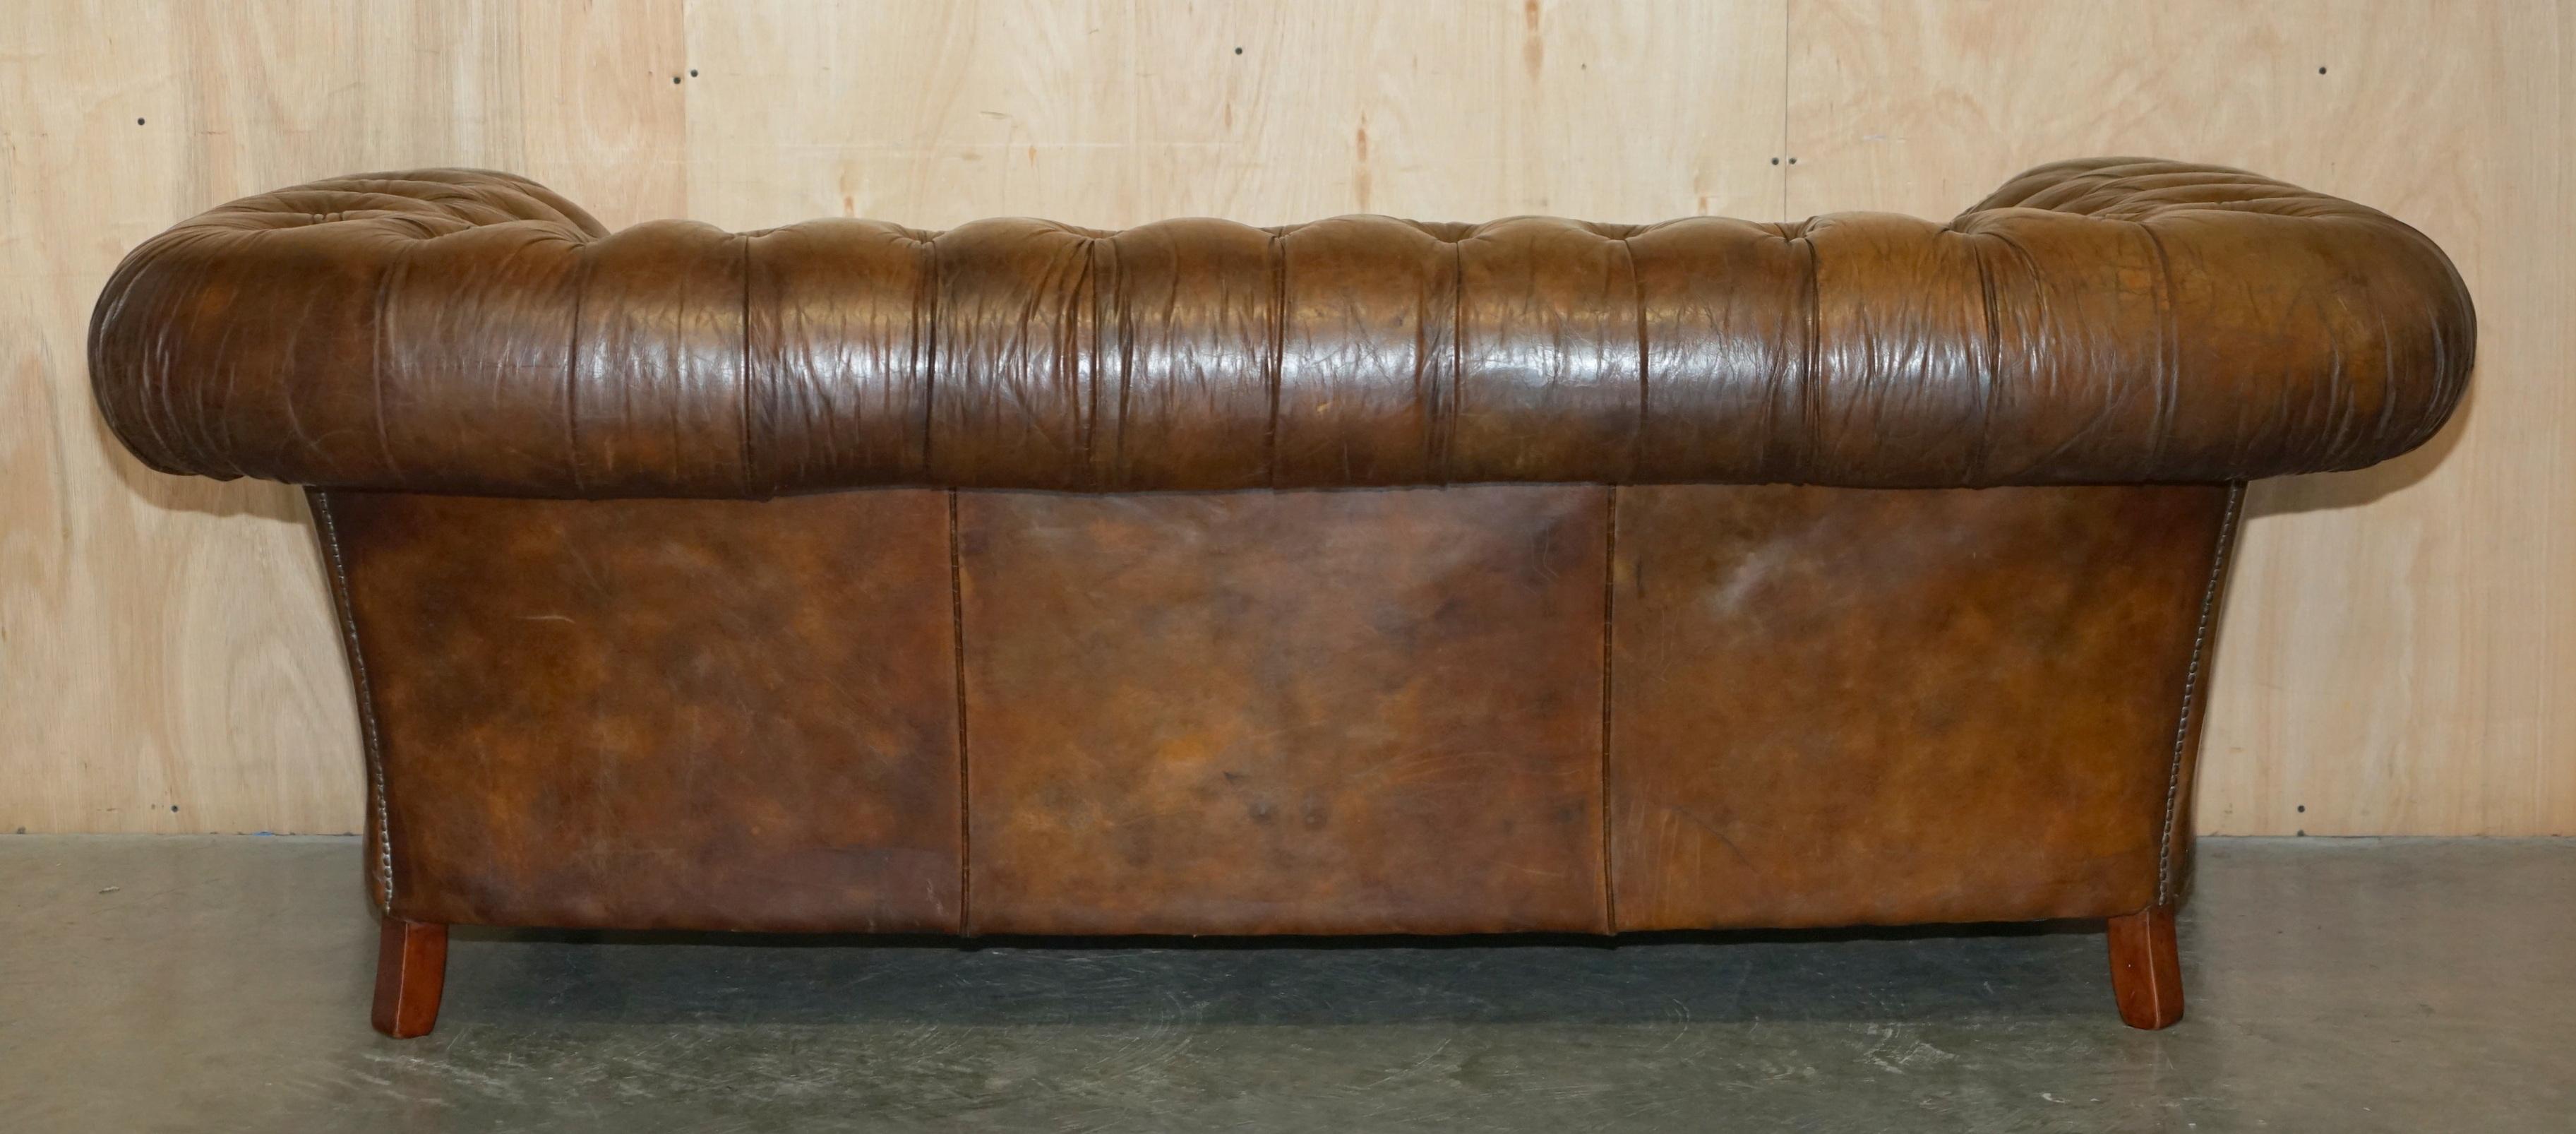 1 DE 2 SOFAS TIMOTHY OULTON HERITAGE BROWN OVERSIZED LEATHER CHESTERFIELD HALO en vente 6